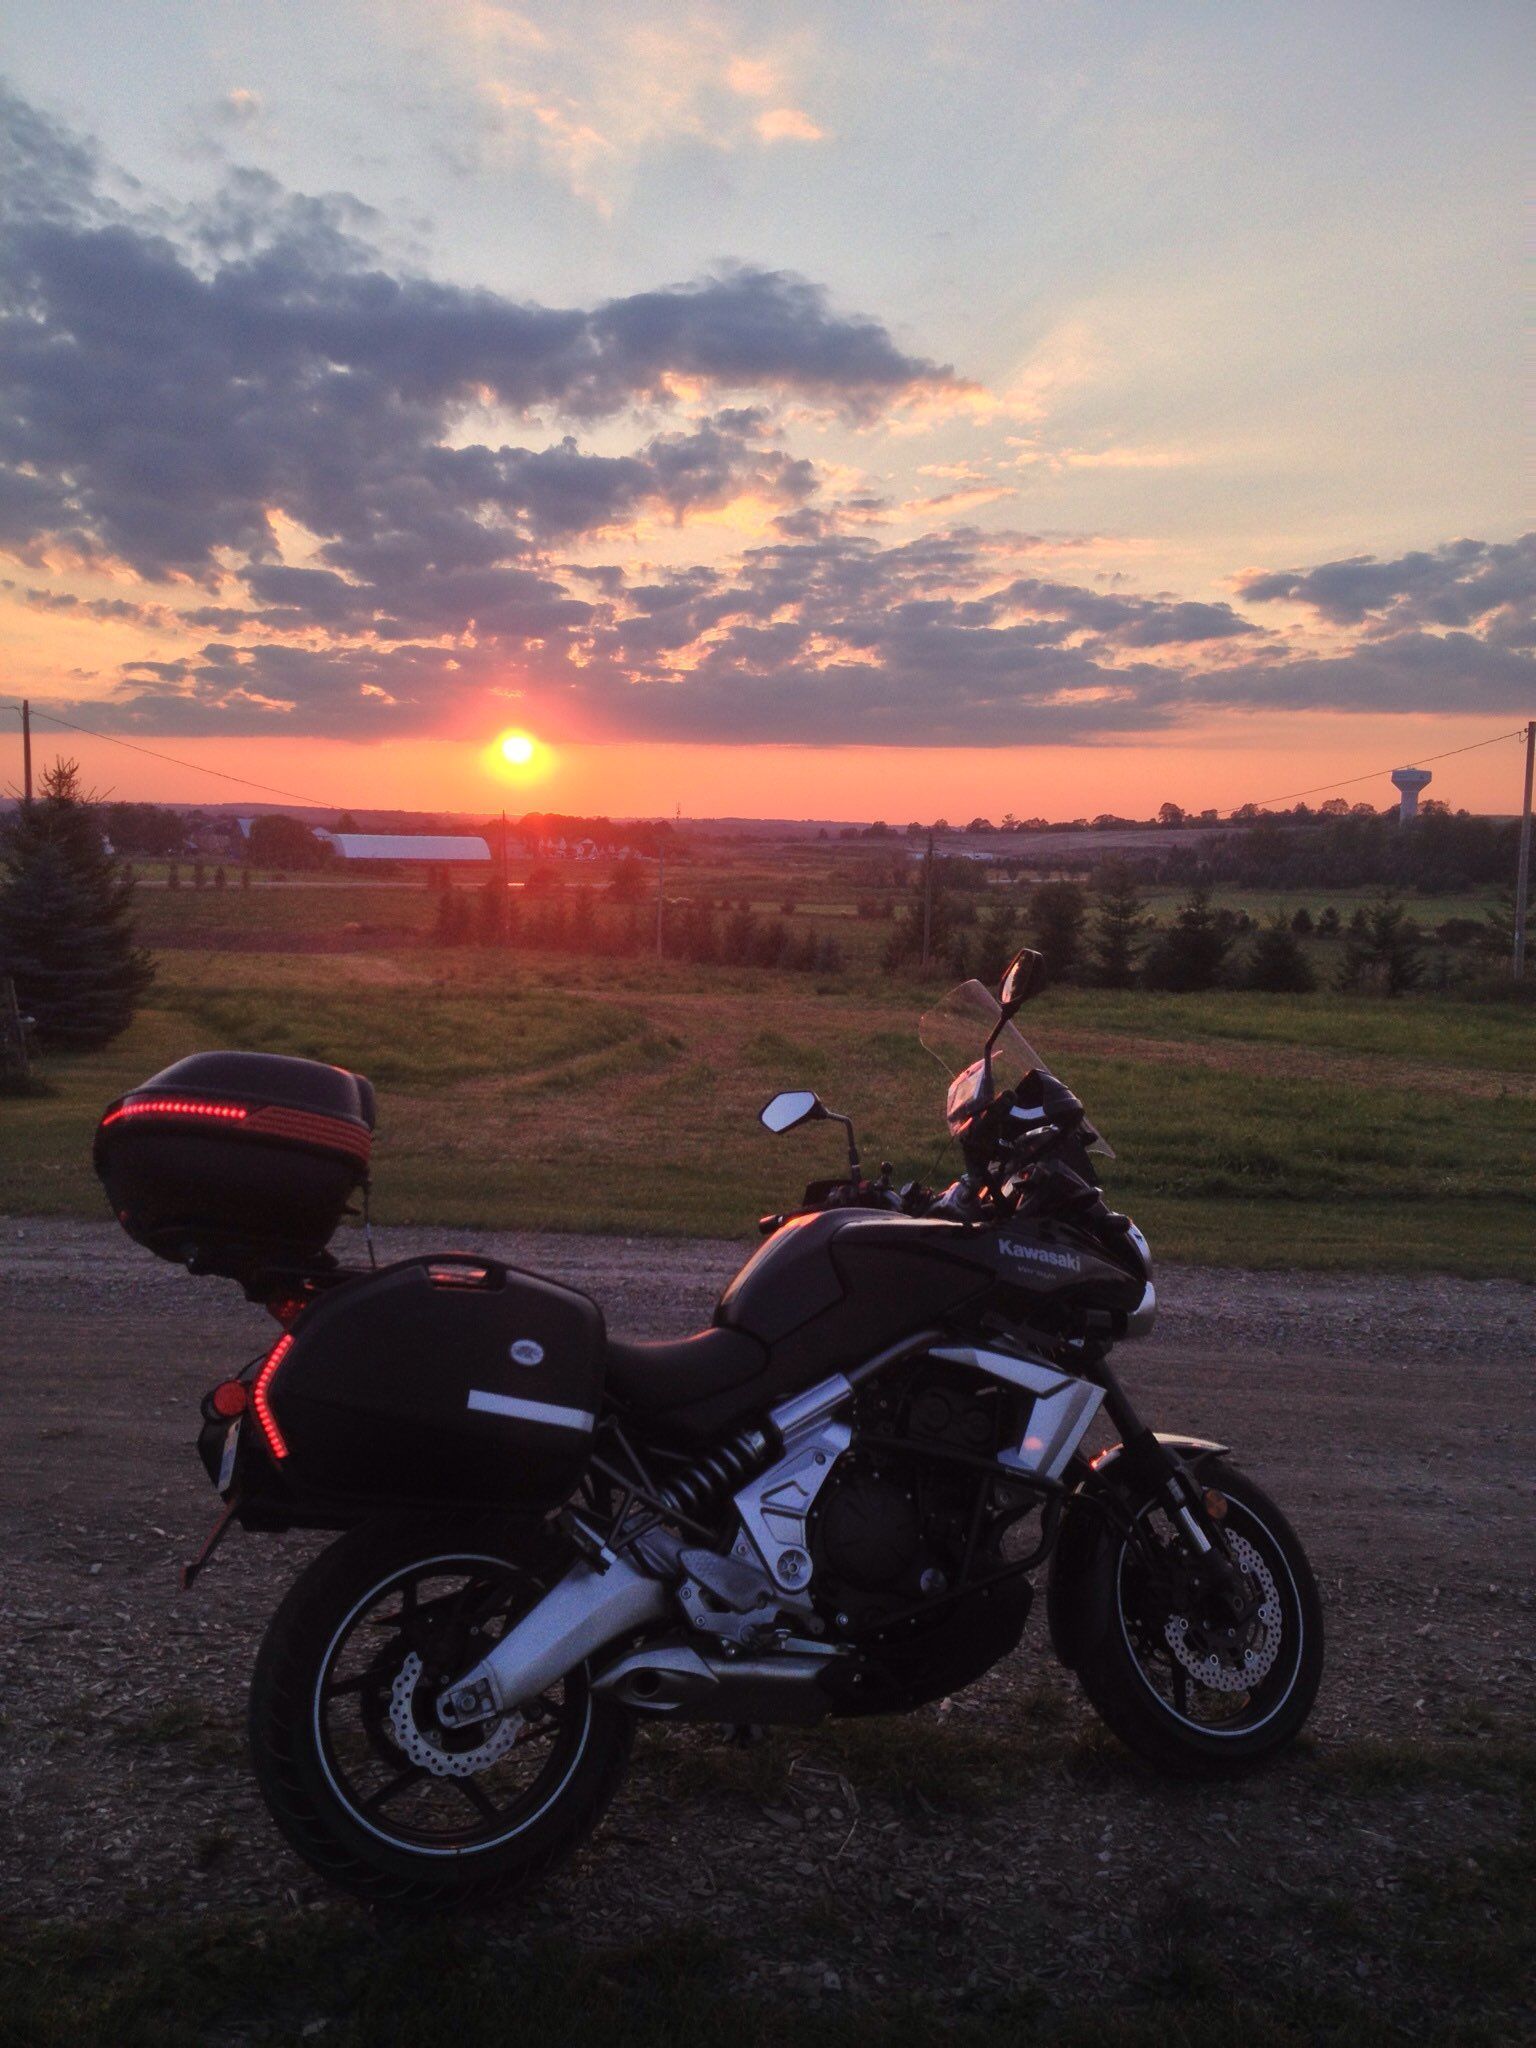 Riding till the sun is down.